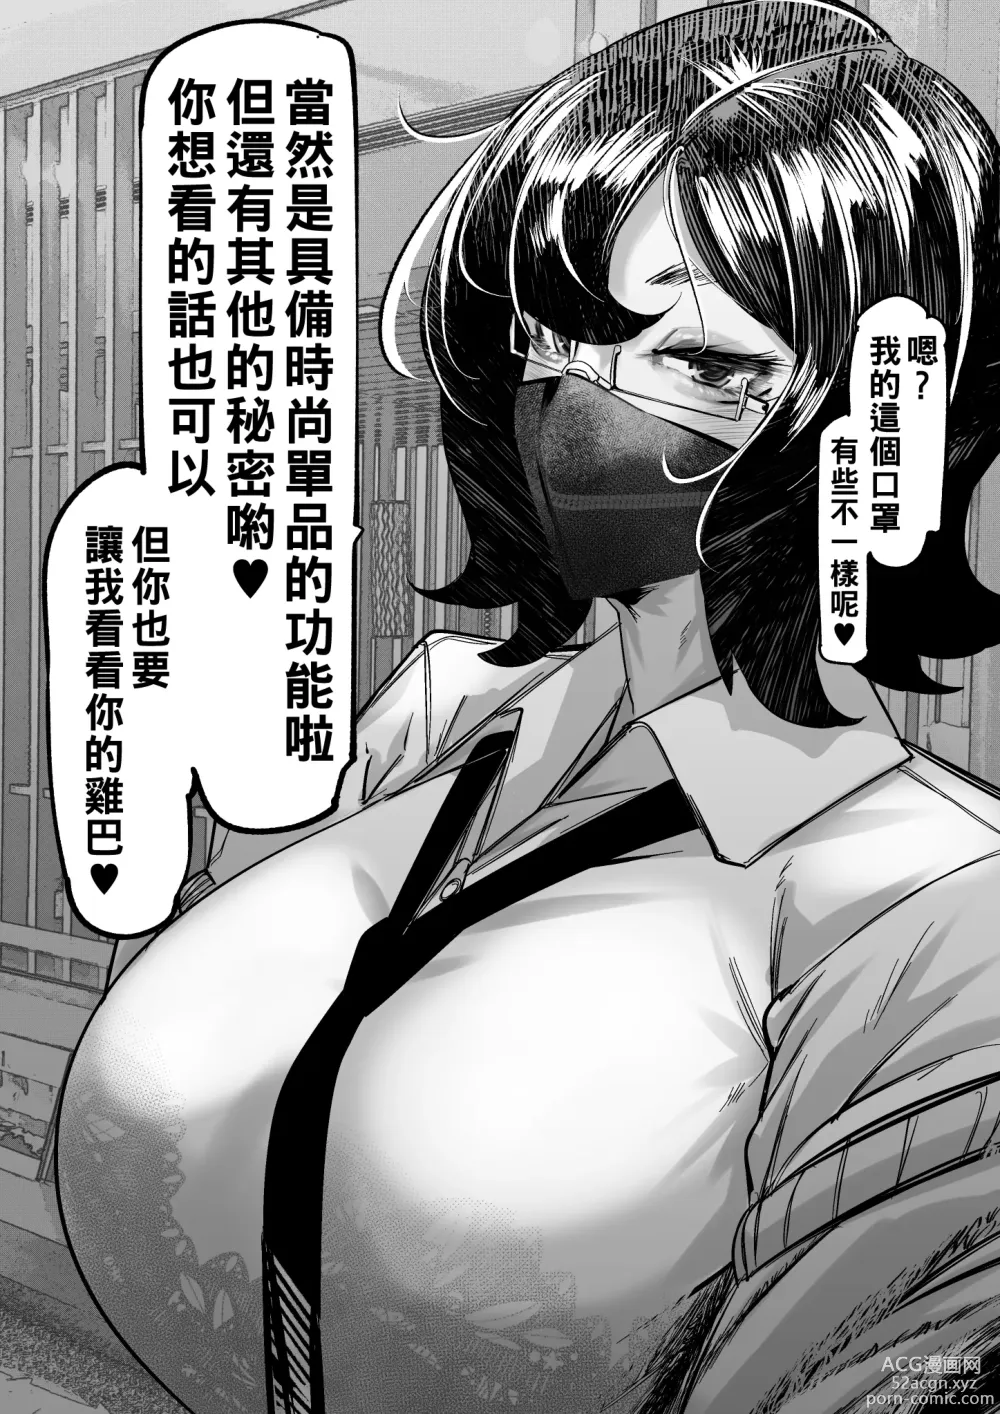 Page 5 of doujinshi 合輯（Chinese）